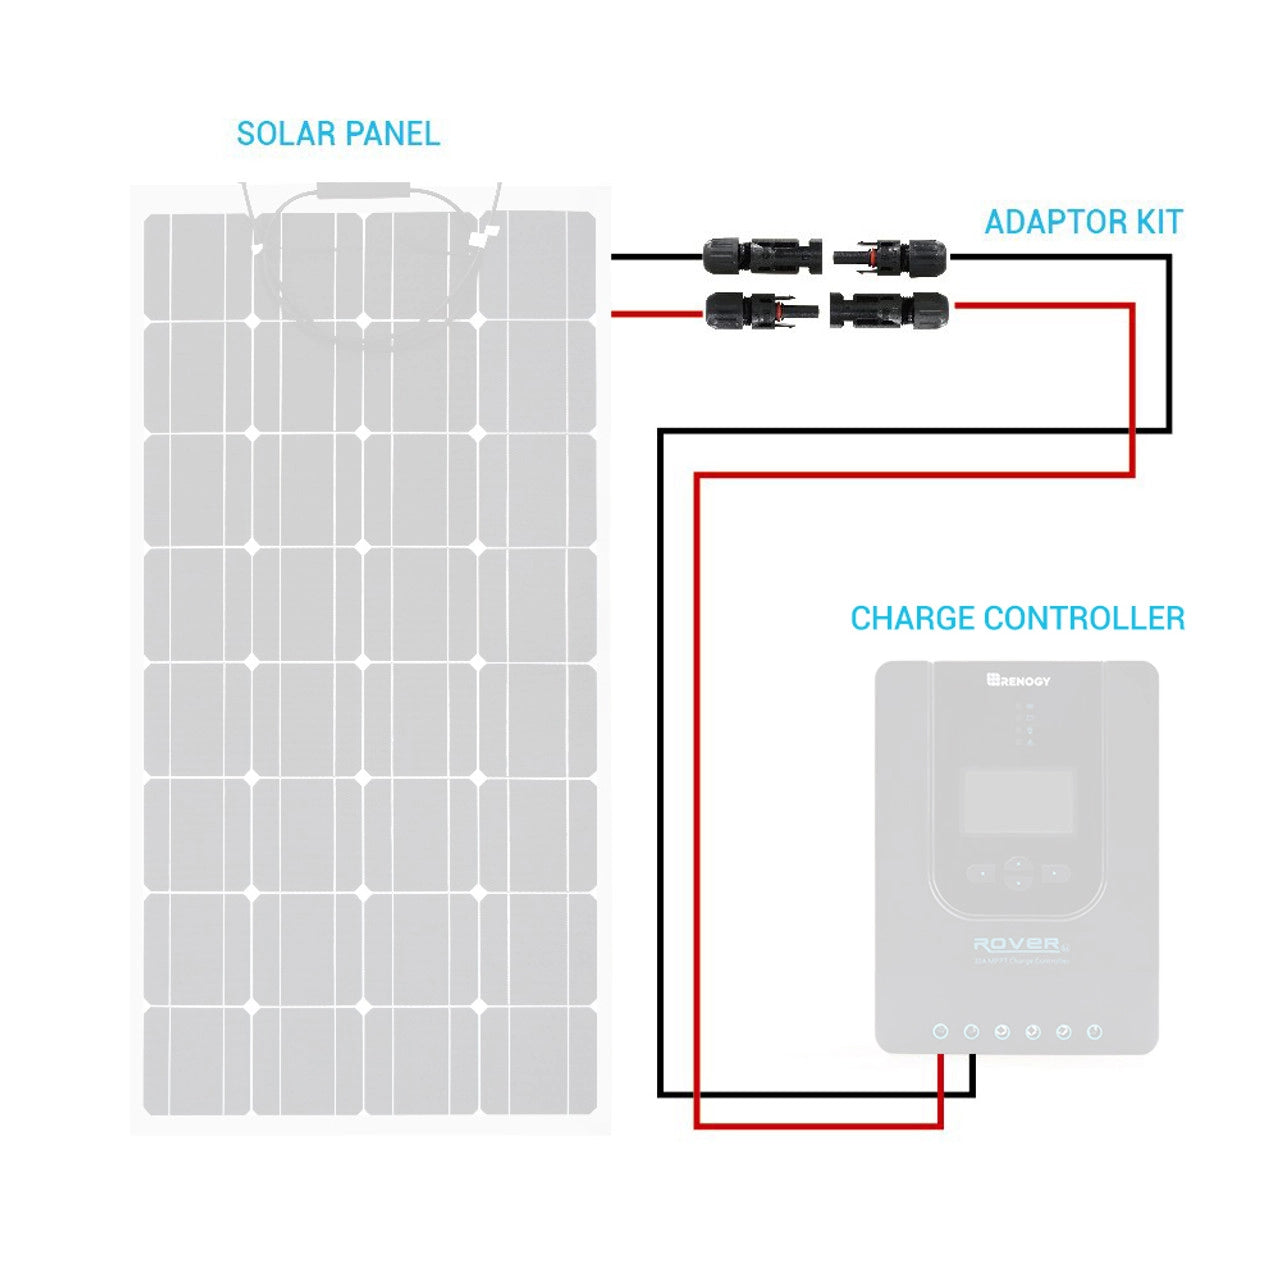 Solar Panel to Charge Controller Adaptor Kit Charge Controller